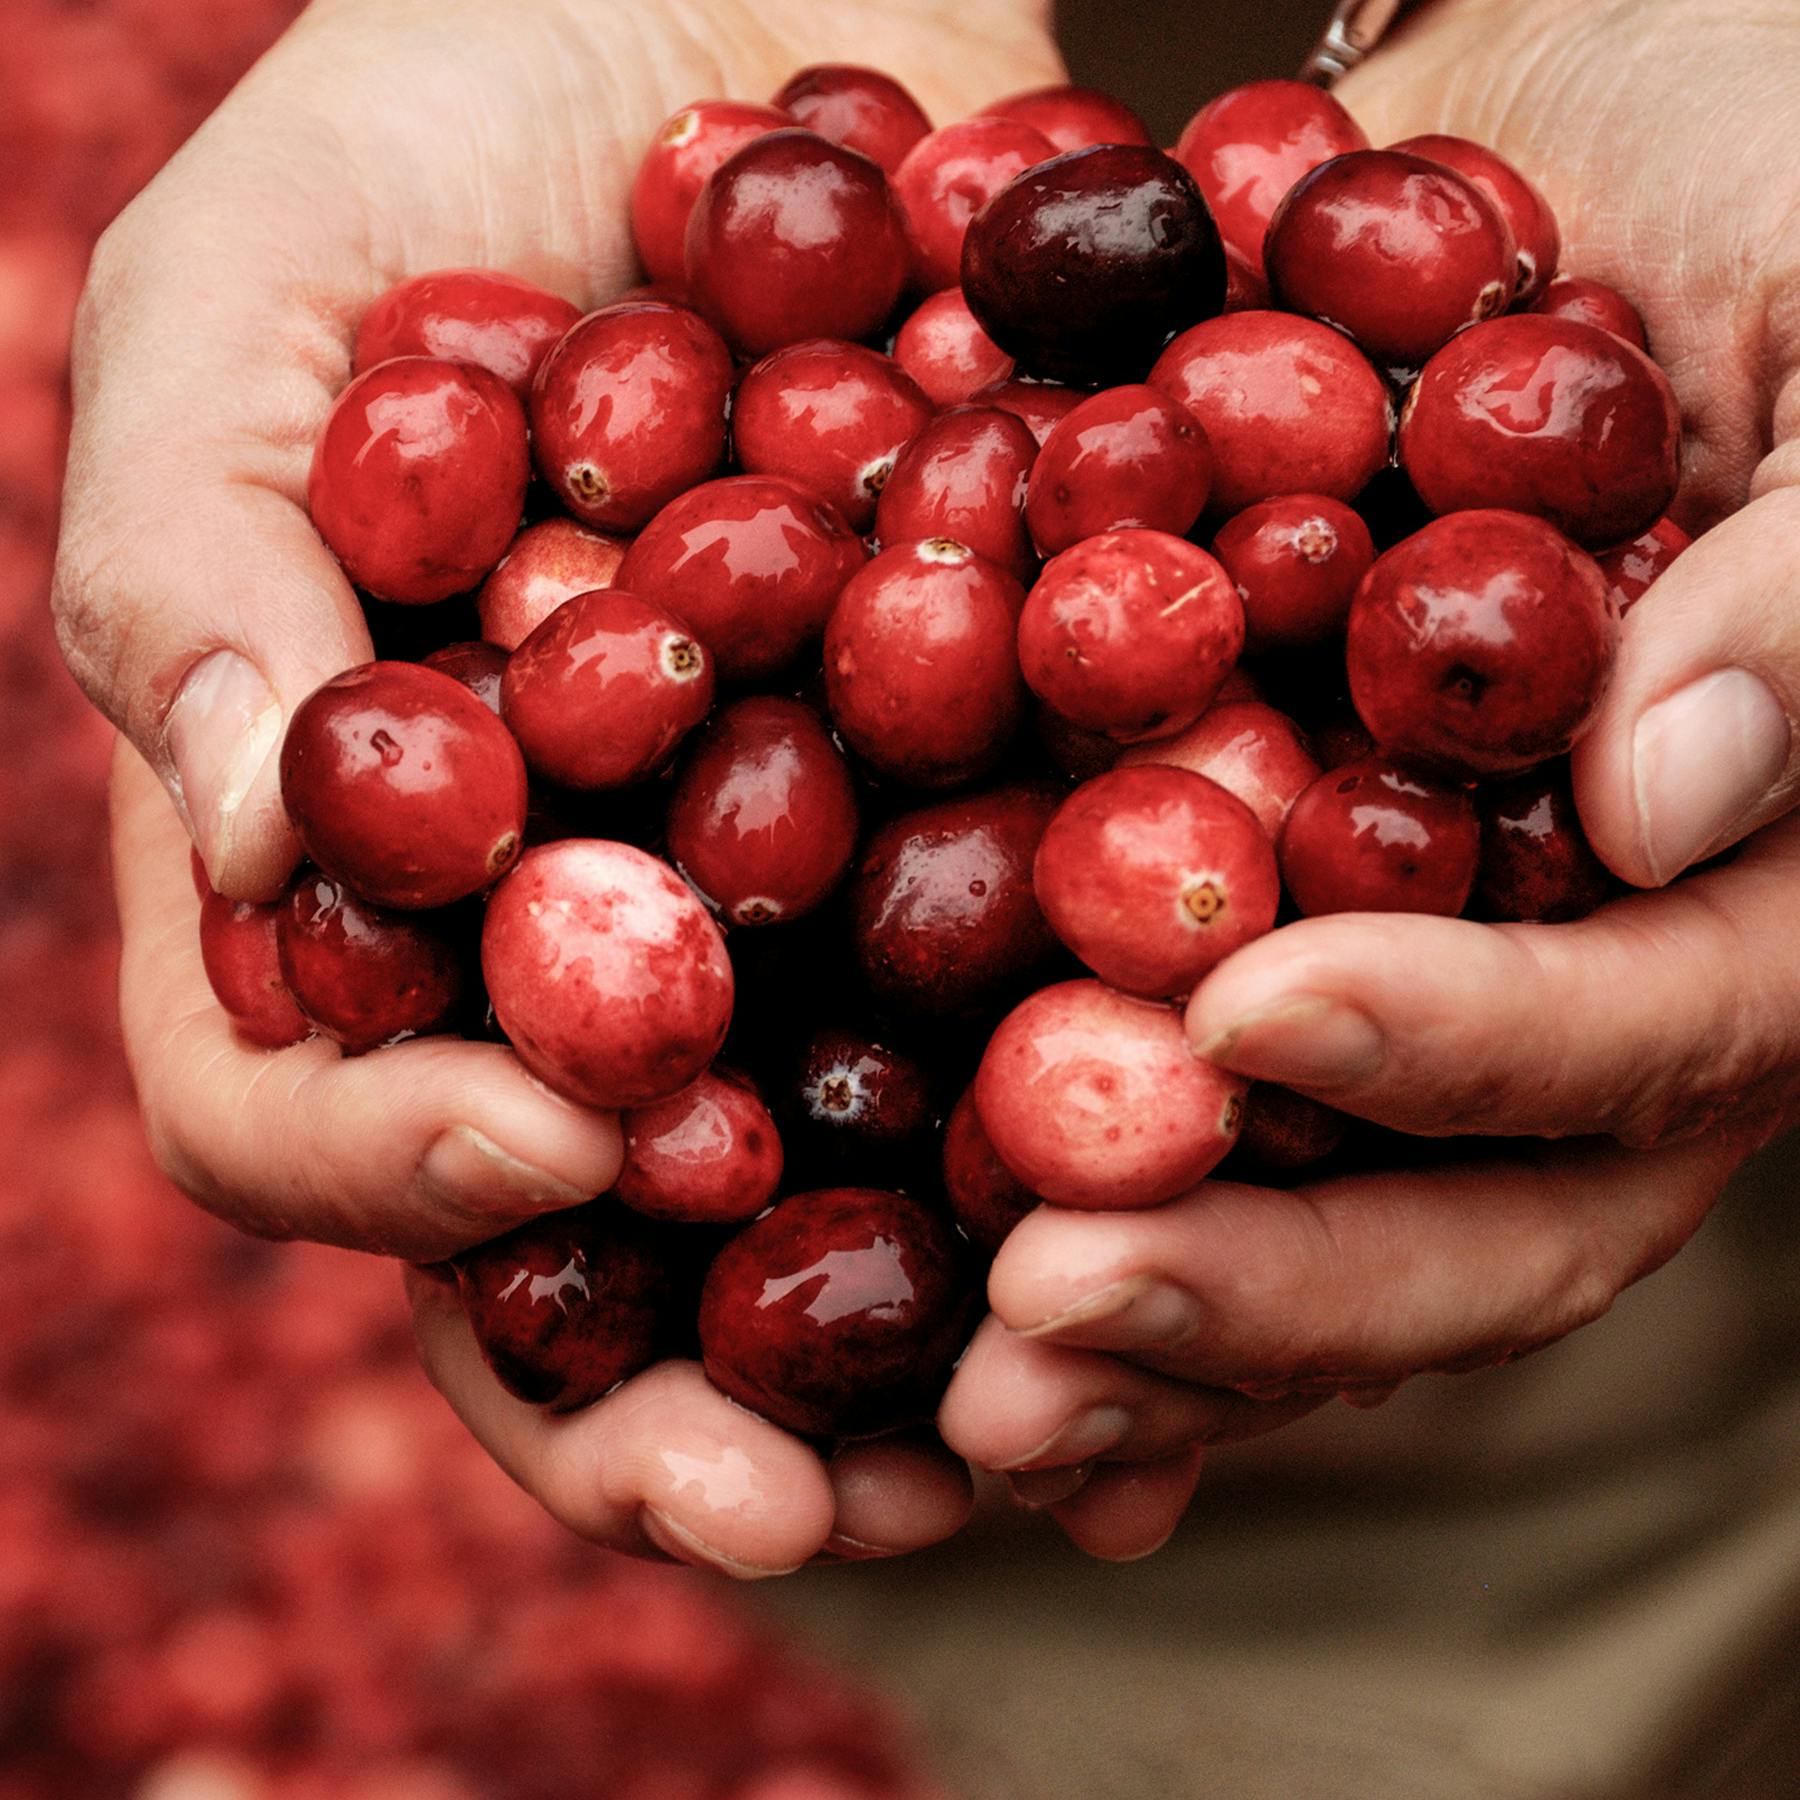 A person holding two handfuls of cranberries.